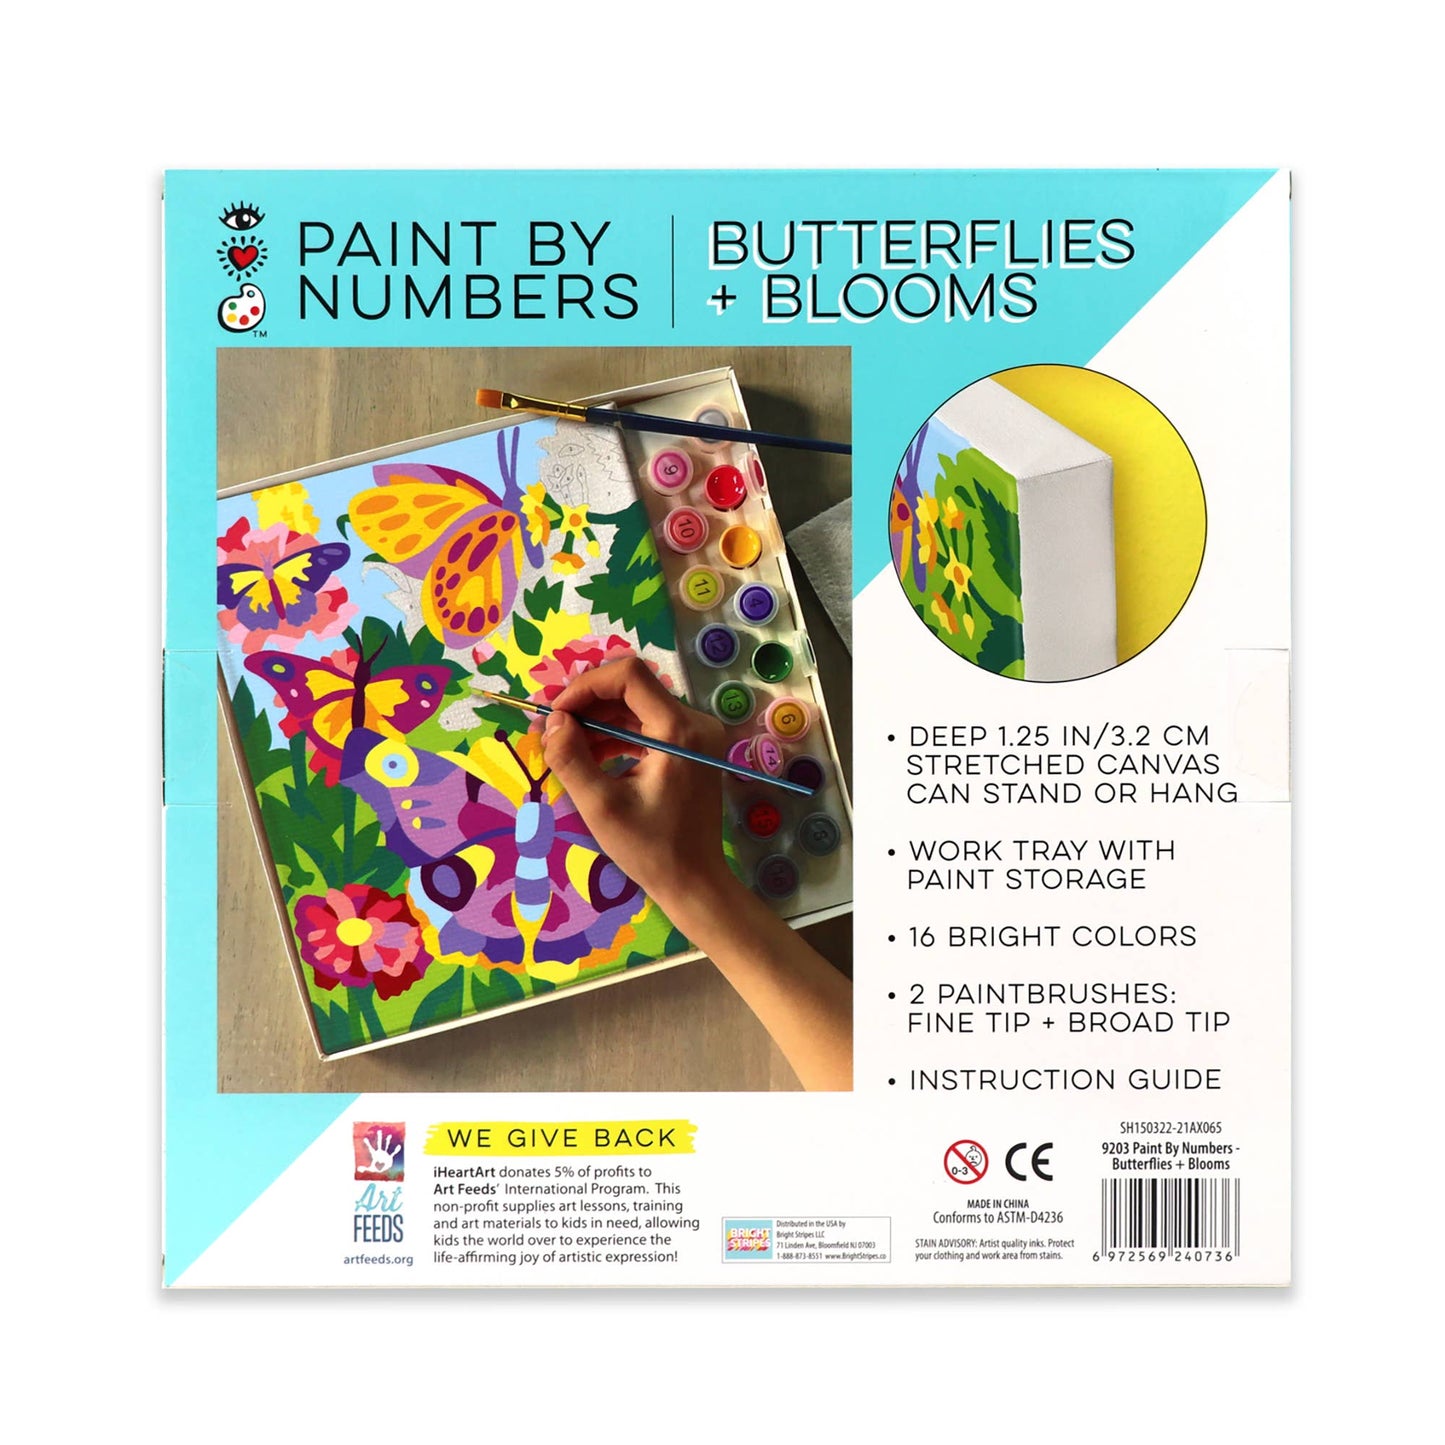 Paint By Numbers Butterflies + Blooms